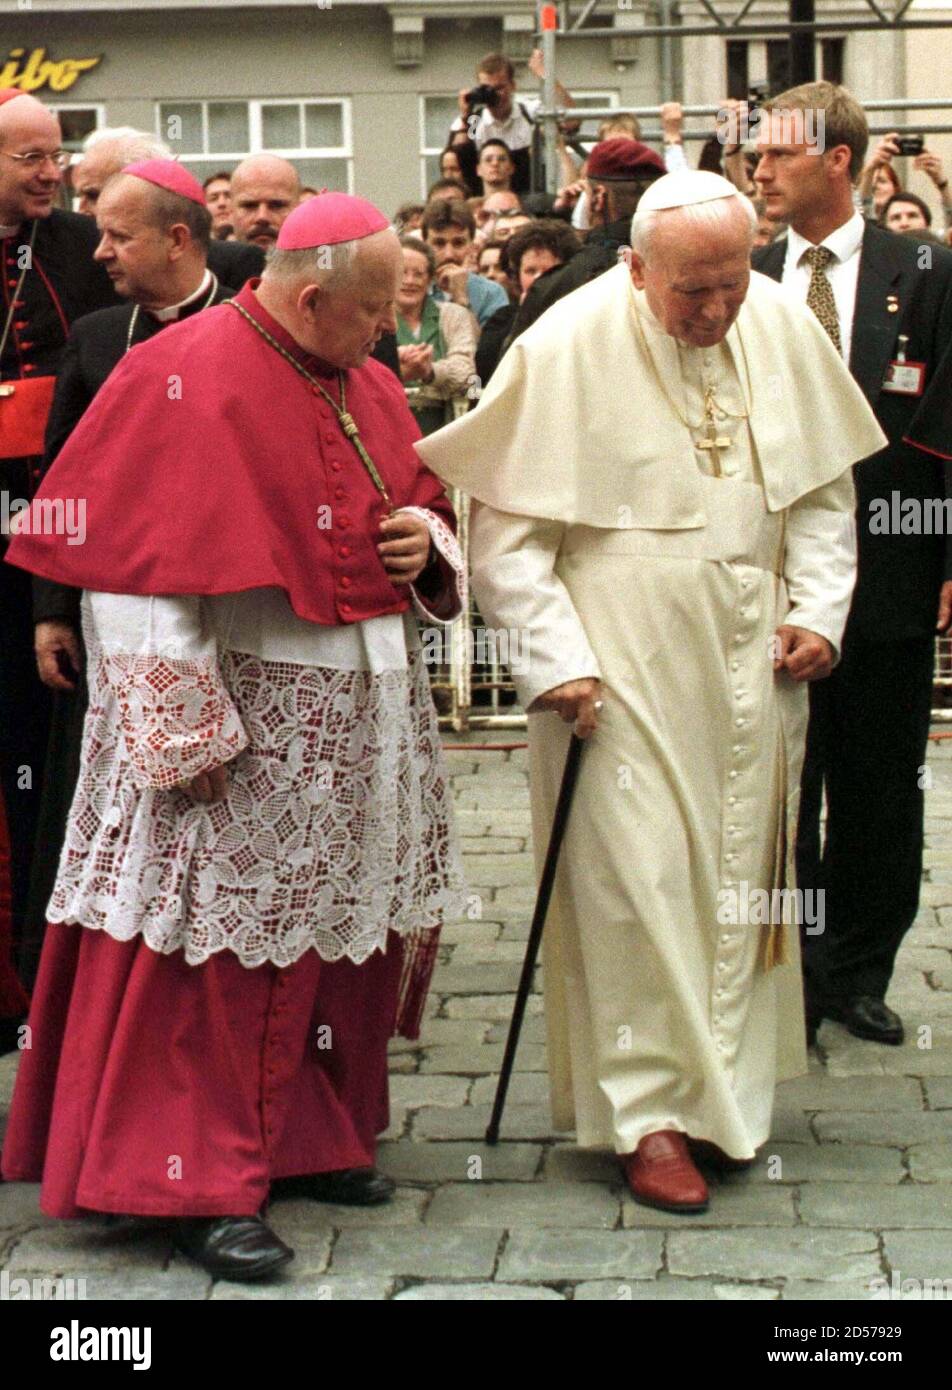 Pope John Paul II (R) and controversial Austrian Bishop Kurt Krenn (L) are  on their way into the Cathedral of St. Poelten June 20. The three-day visit  to Salzburg, St. Poelten and